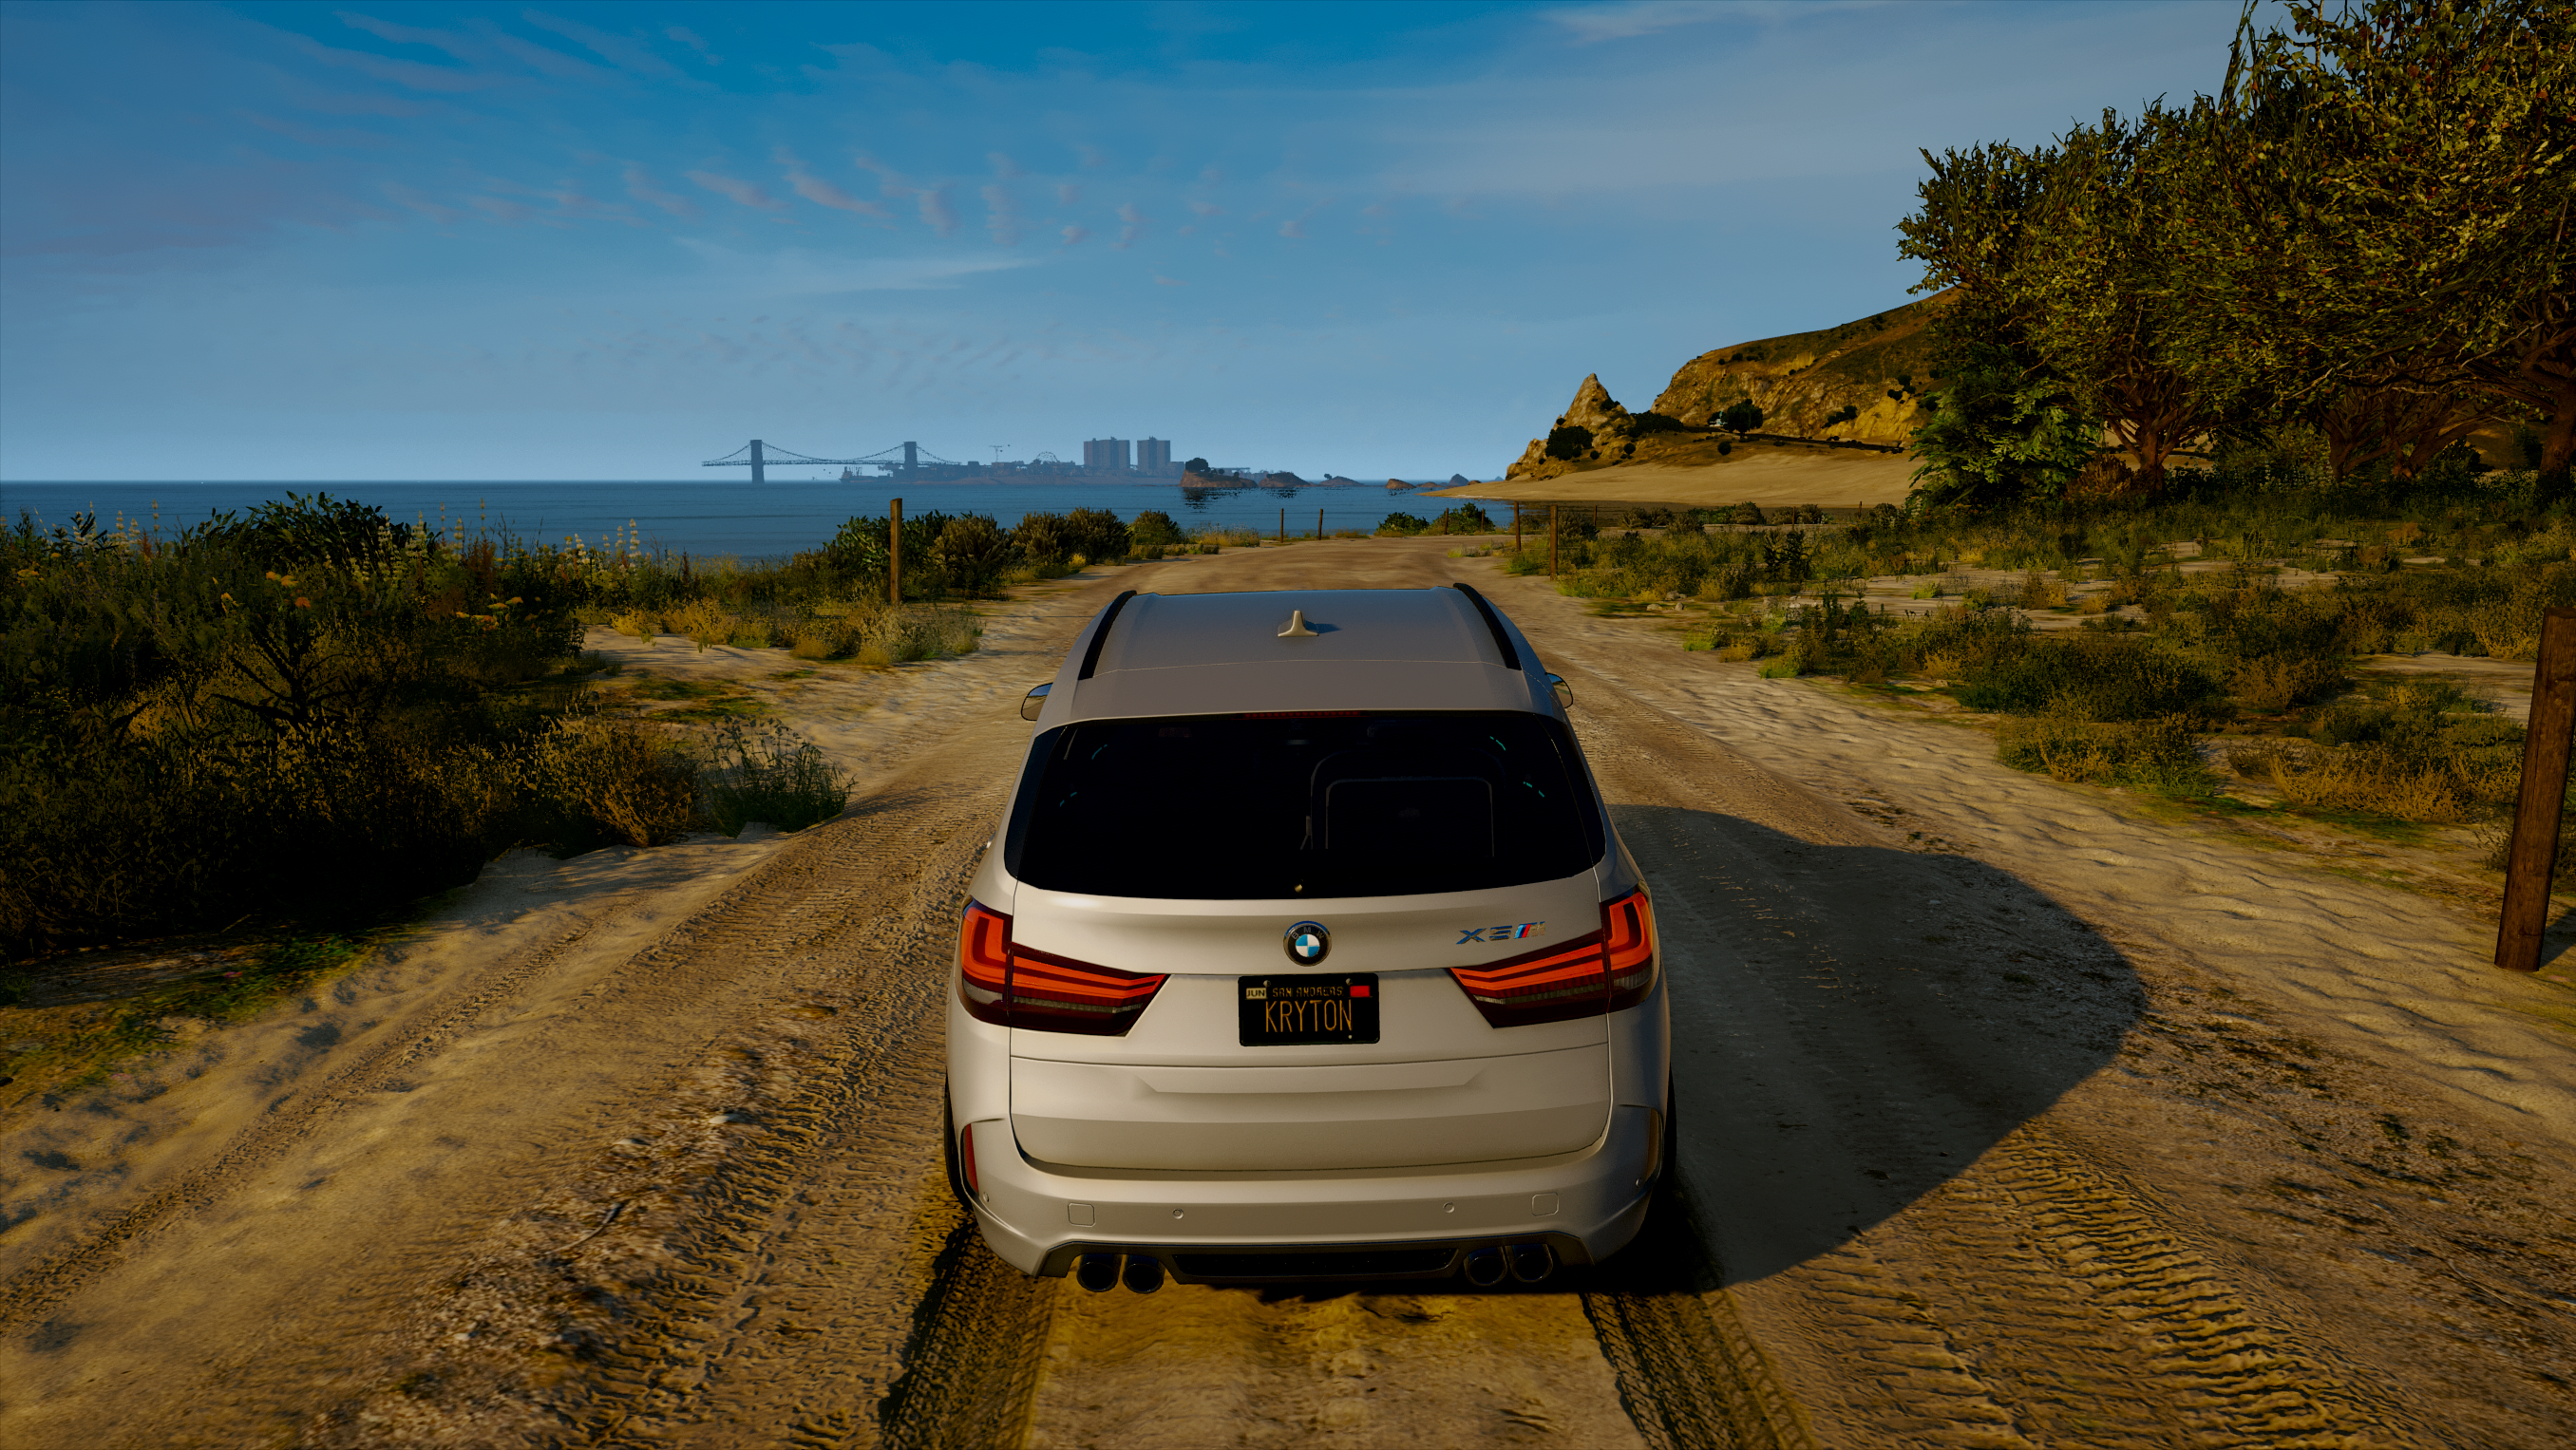 Bmw x5 beamng. BMW x5. BMW x5m GTA 5. BMW x5 e53 ГТА 5 РП. BMW x5 m Competition.